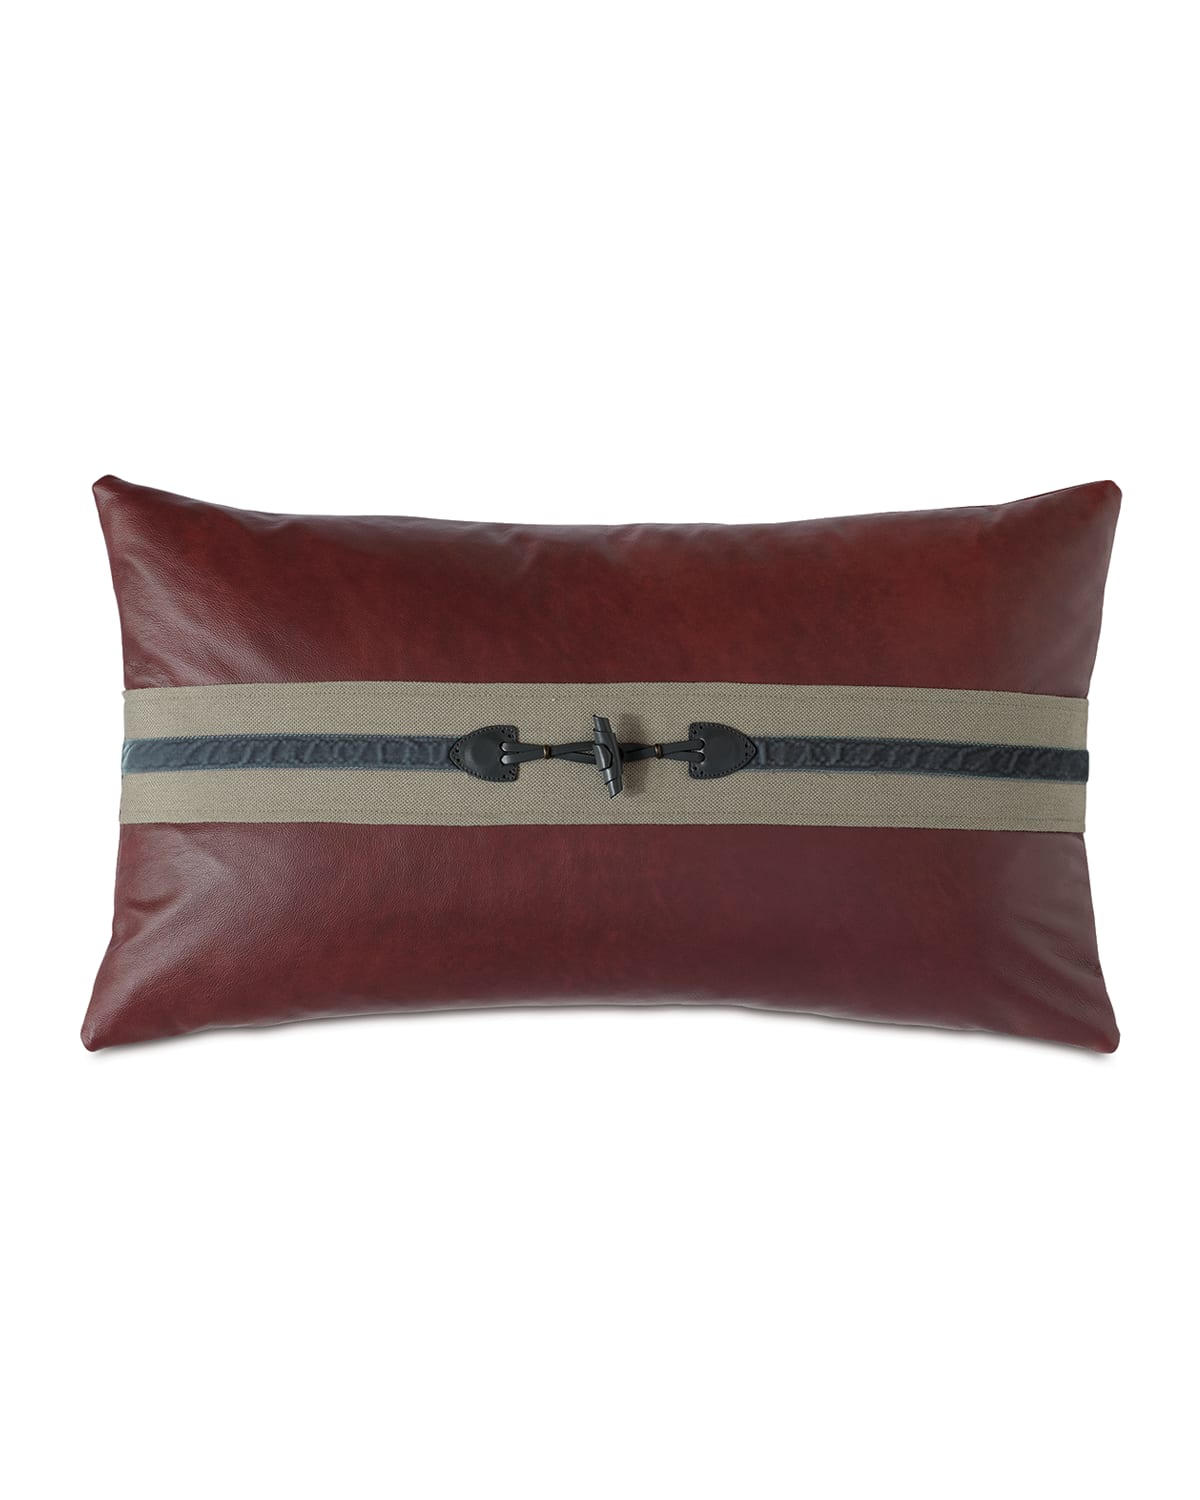 Shop Eastern Accents Kilbourn Boudoir Pillow In Red